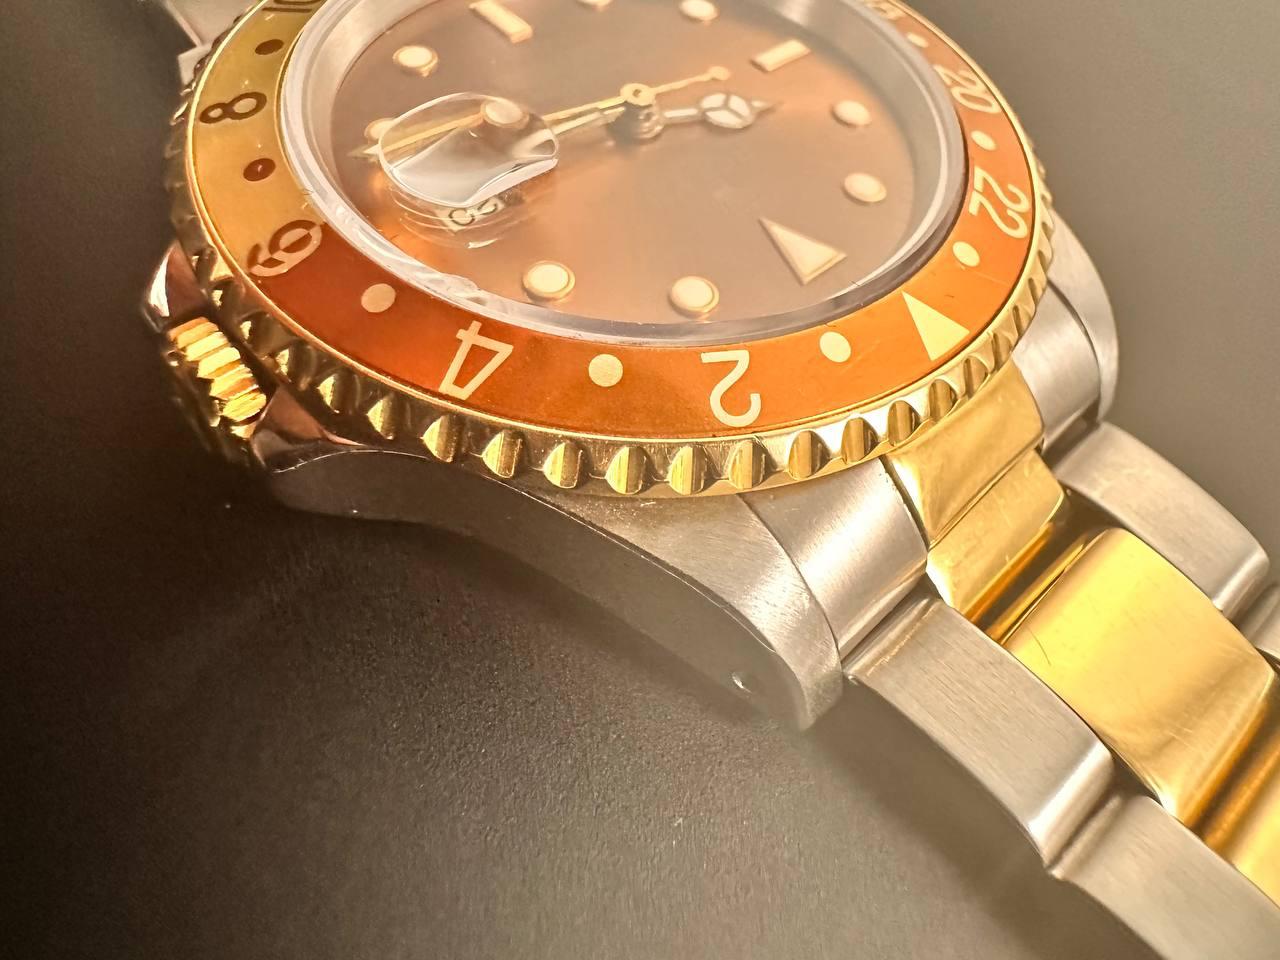 Rolex Gmt Master II reference 16713 